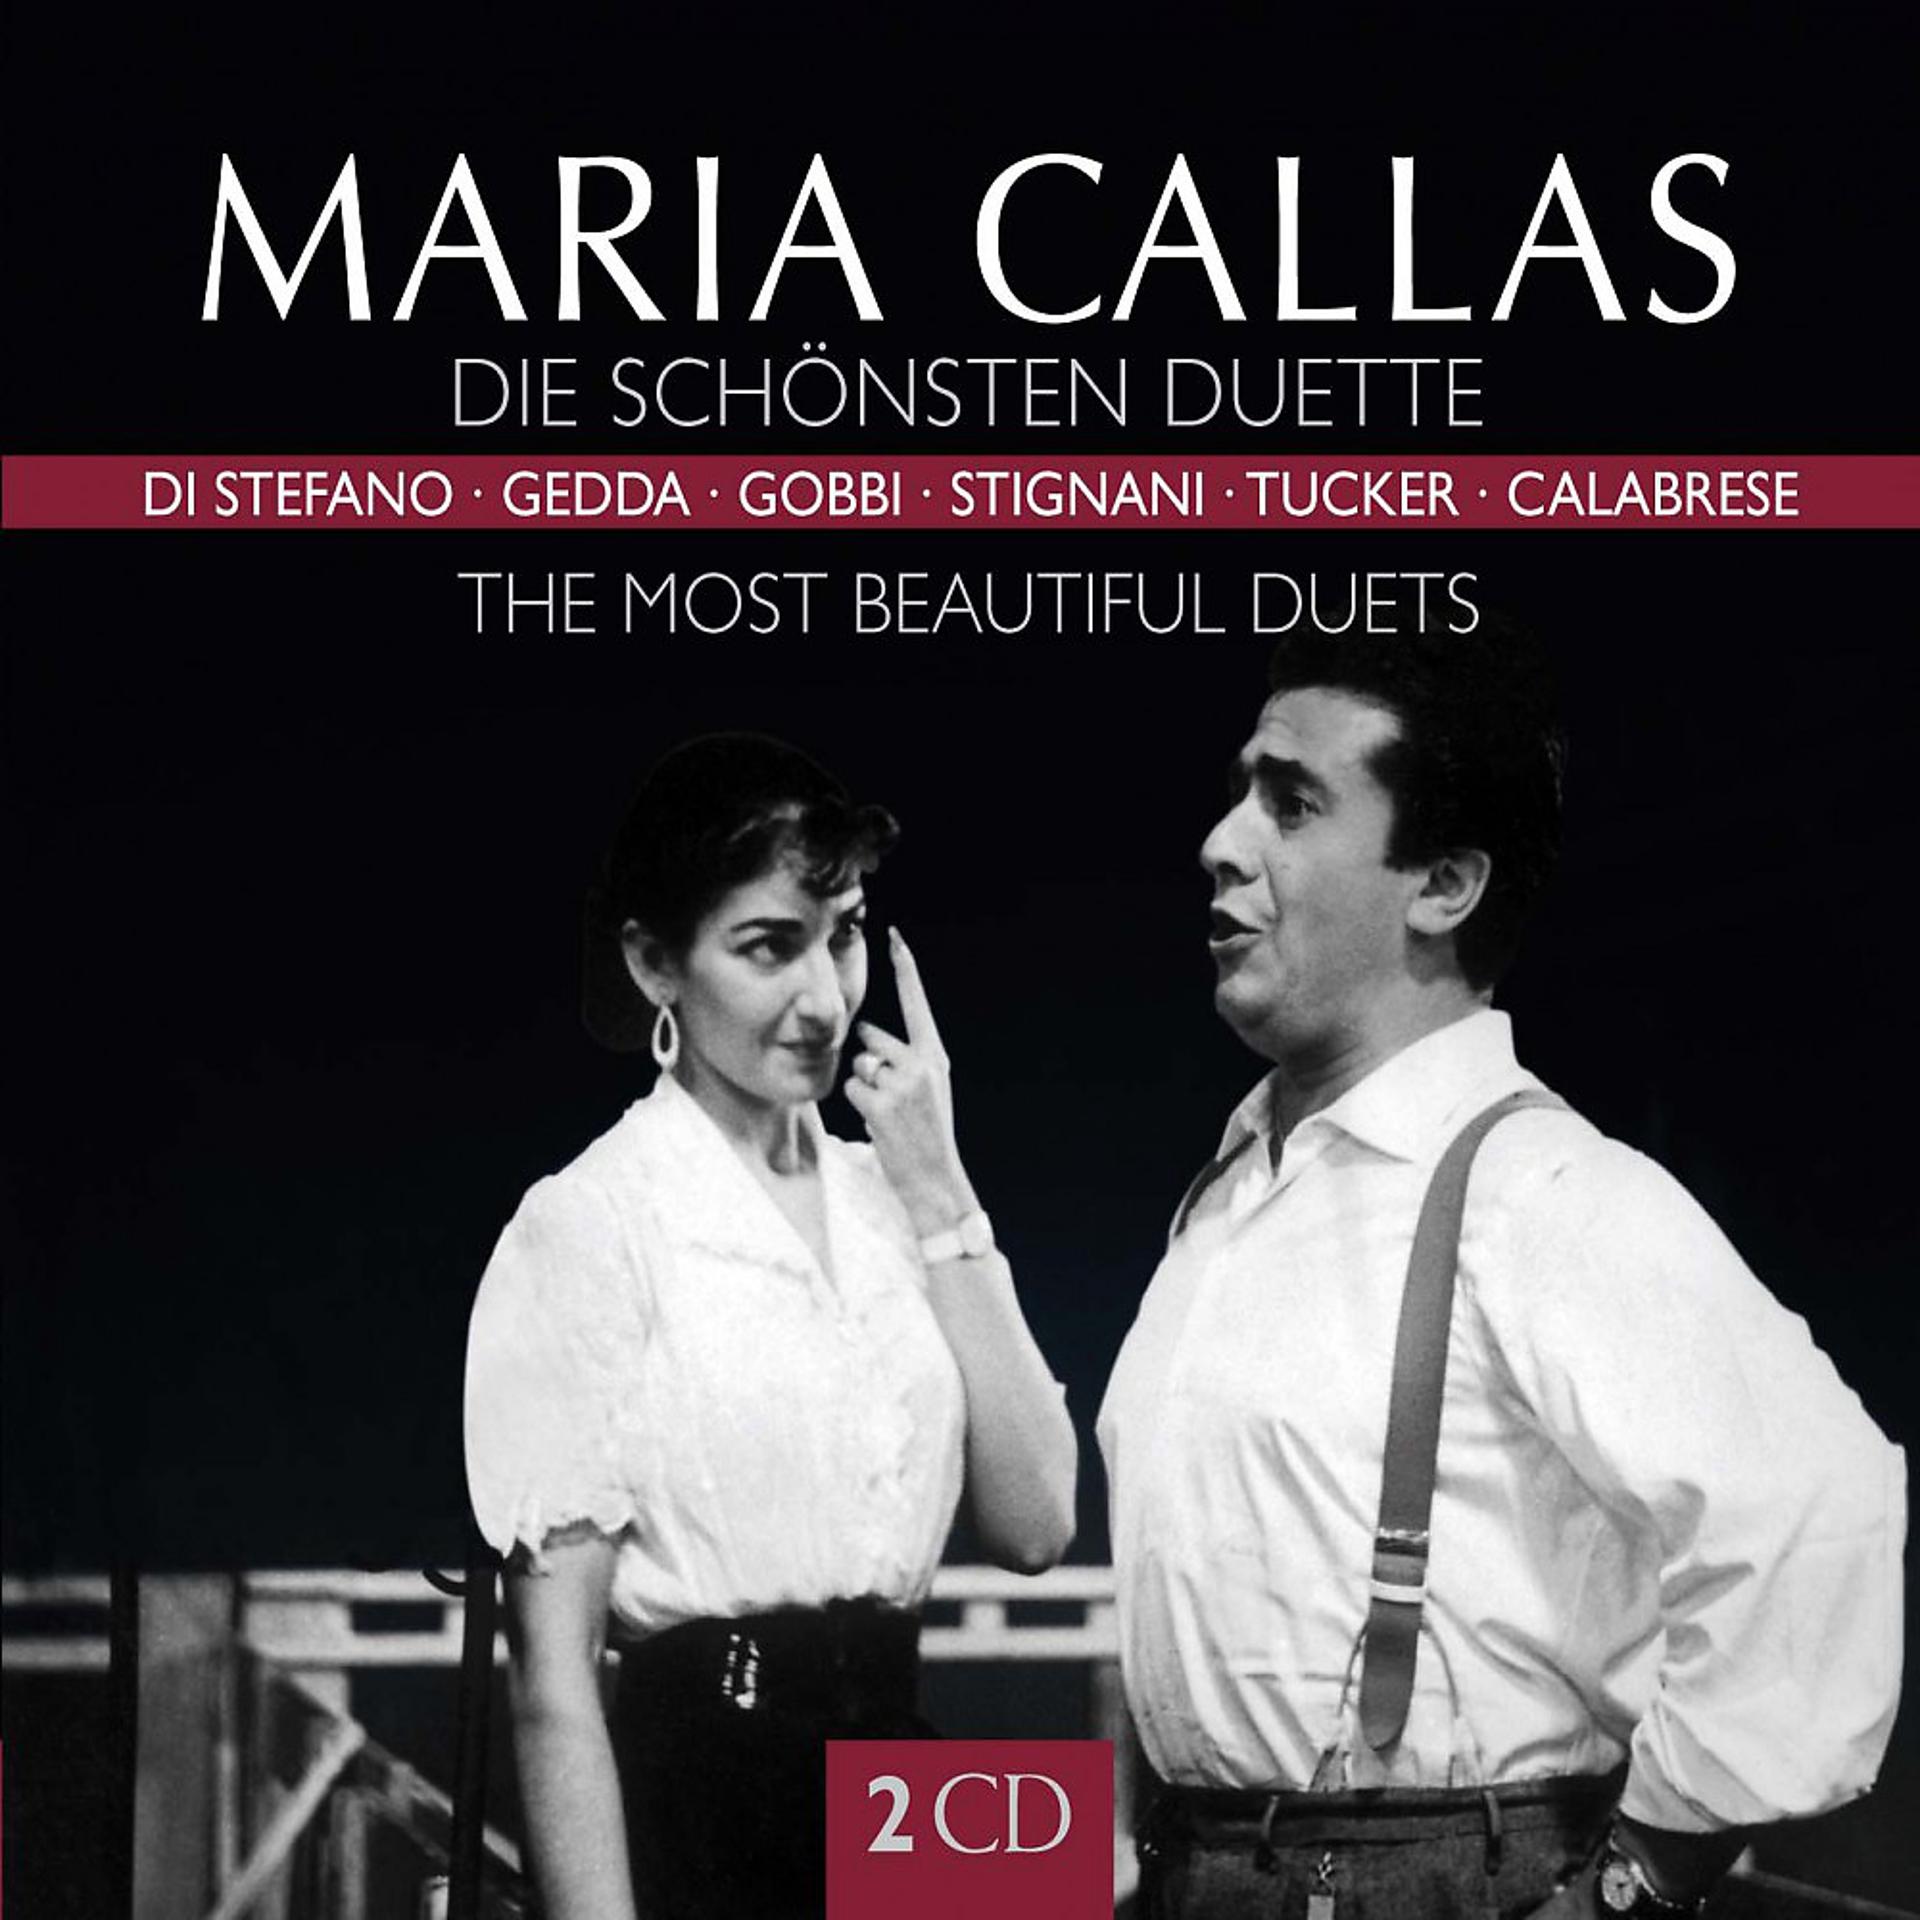 Постер альбома Maria Callas "The Most Famous Duets"